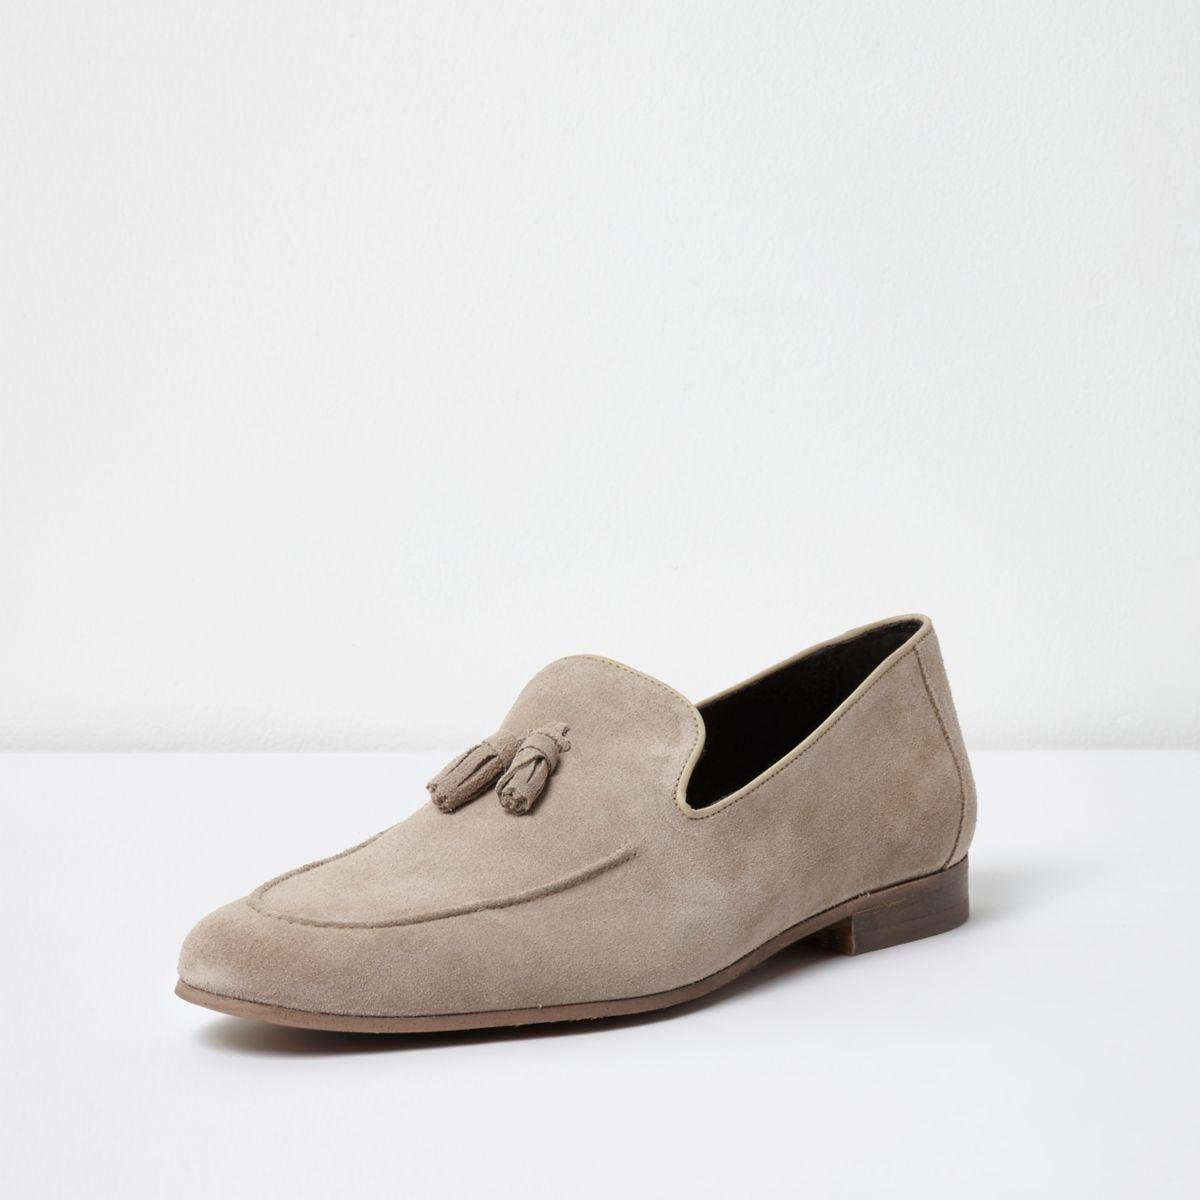 Lyst - River Island Stone Suede Tassel Loafers for Men